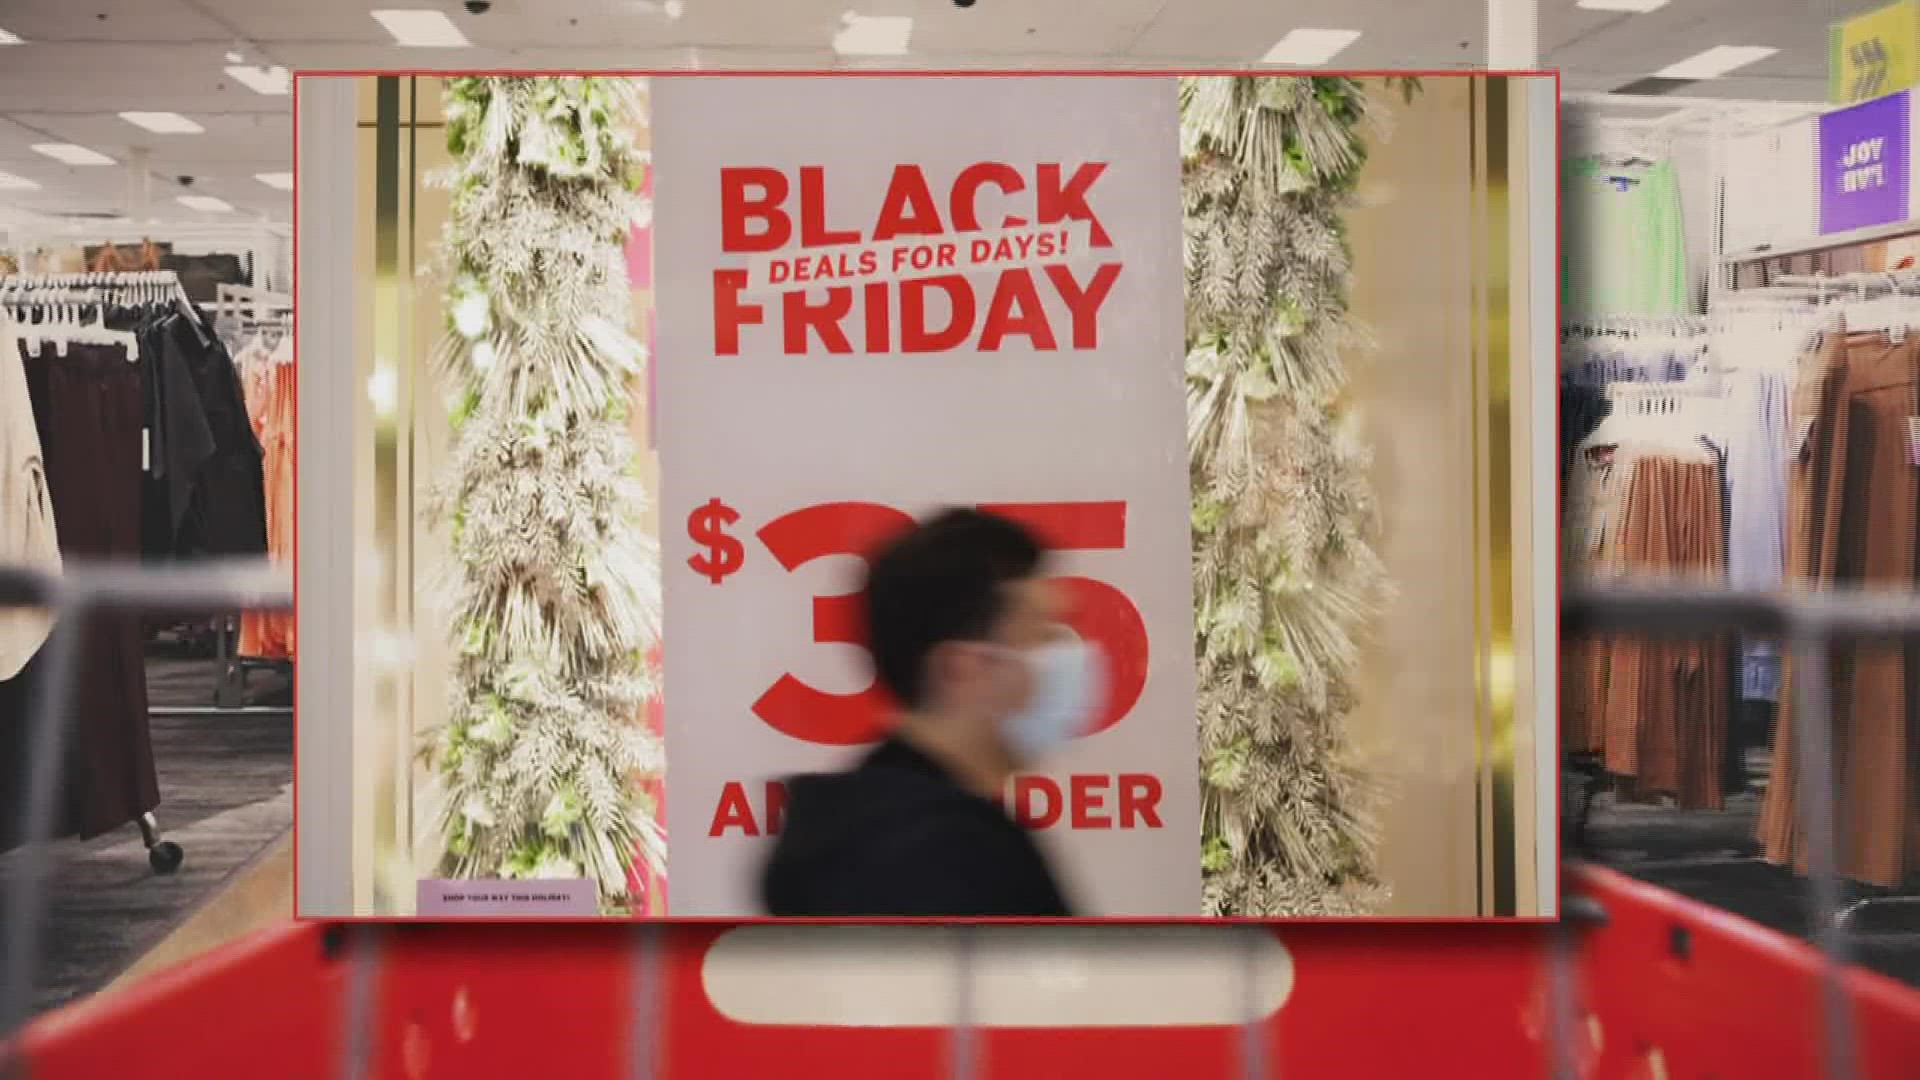 Black Friday is tomorrow and consumers are seeing the deals.